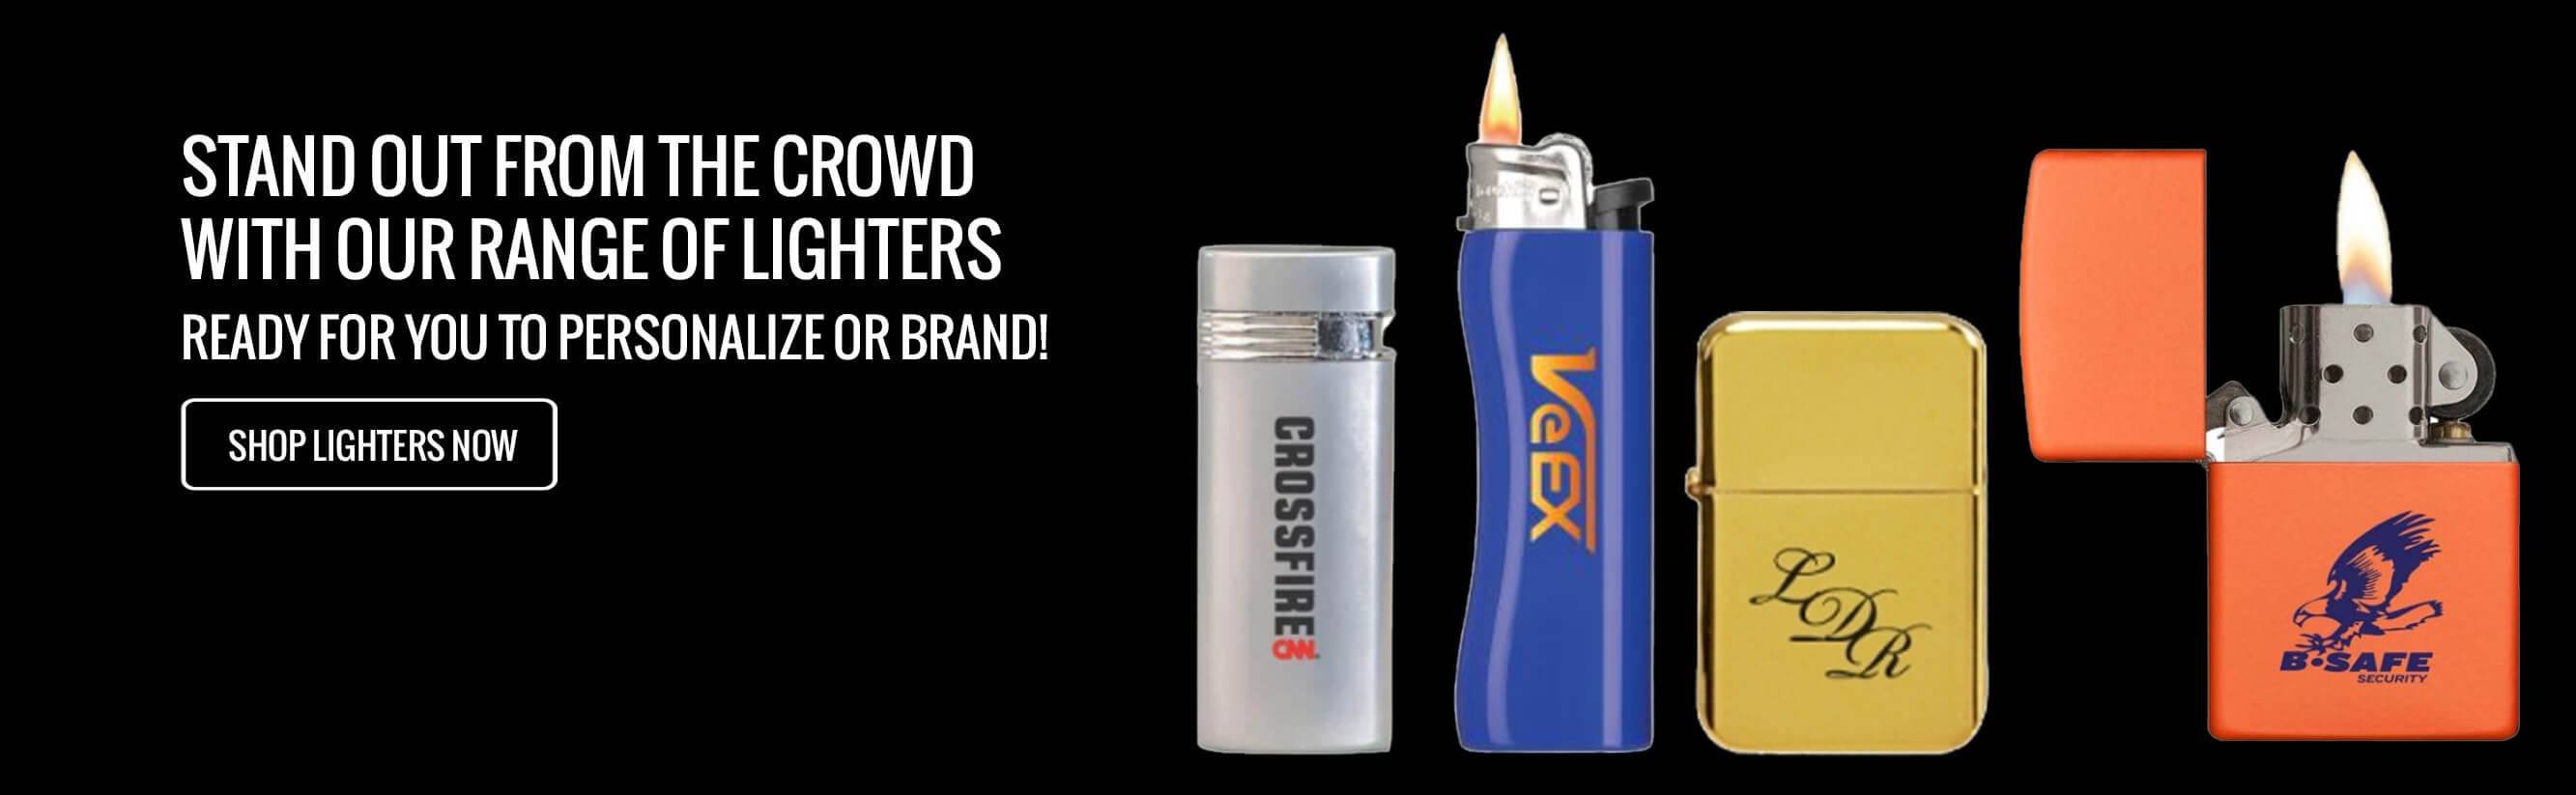 Corporate gifts and advertising specialties from rushIMPRINT